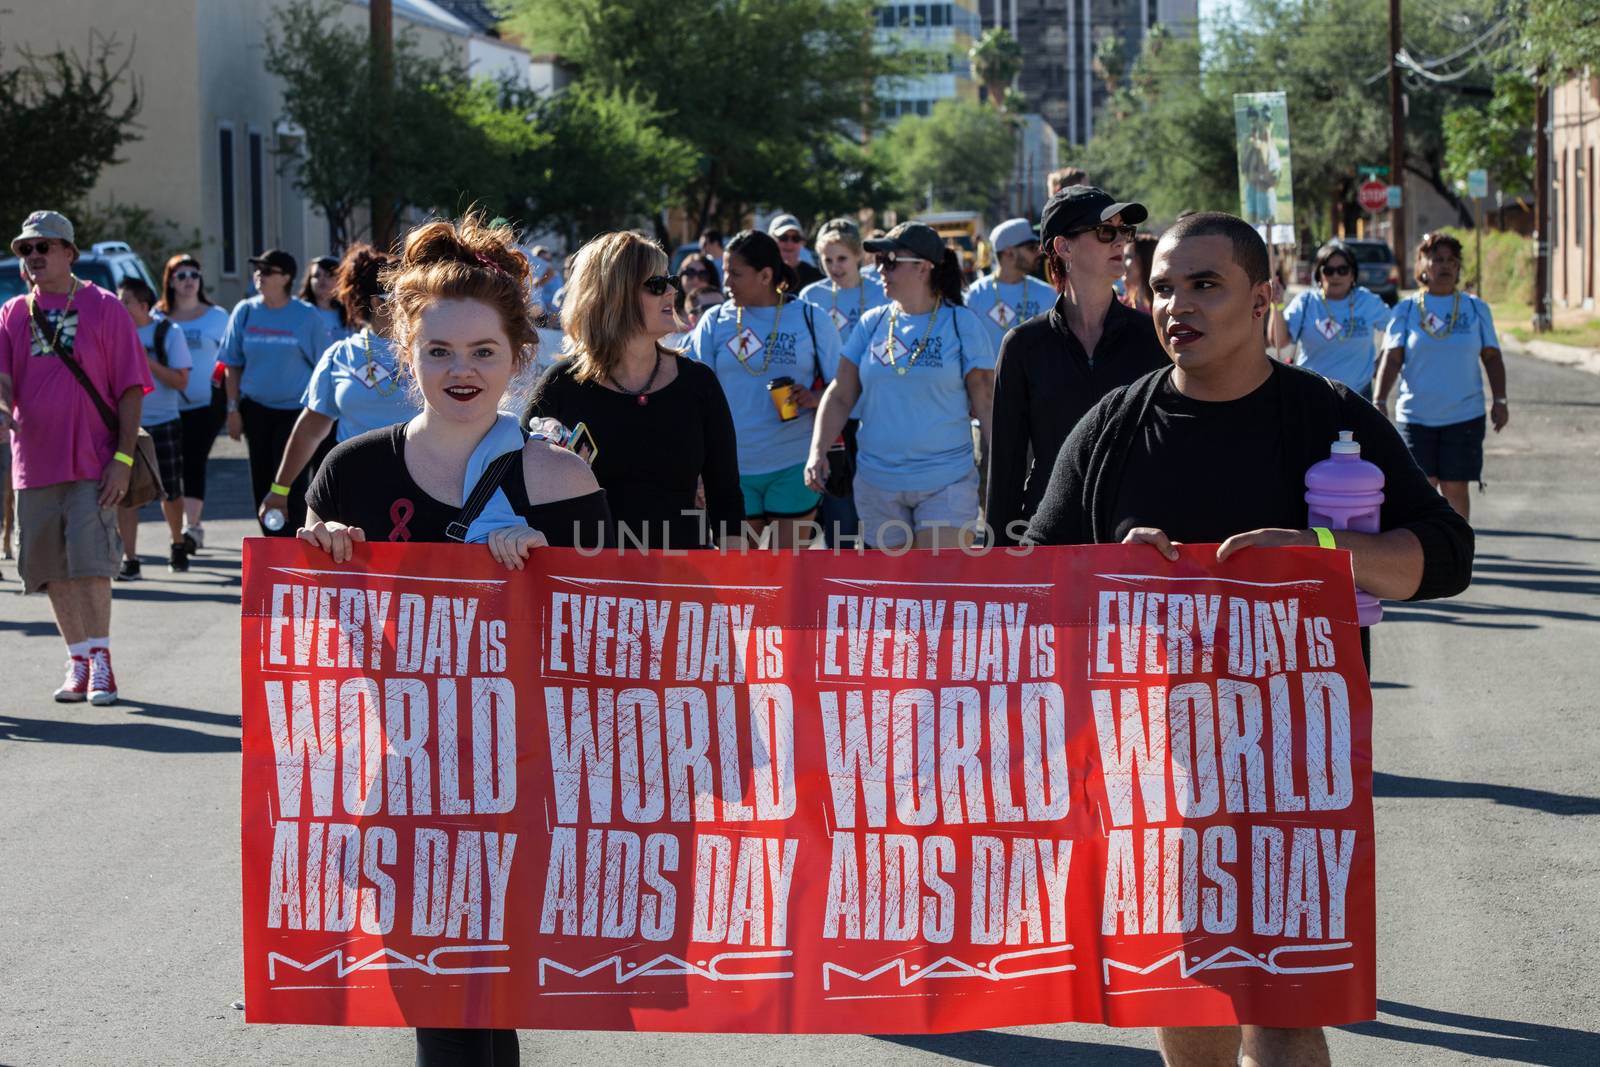 TUCSON, AZ/USA - OCTOBER 12:  Walker s with World AIDS Day sign at AIDSwalk on October 12, 2014 in Tucson, Arizona, USA.